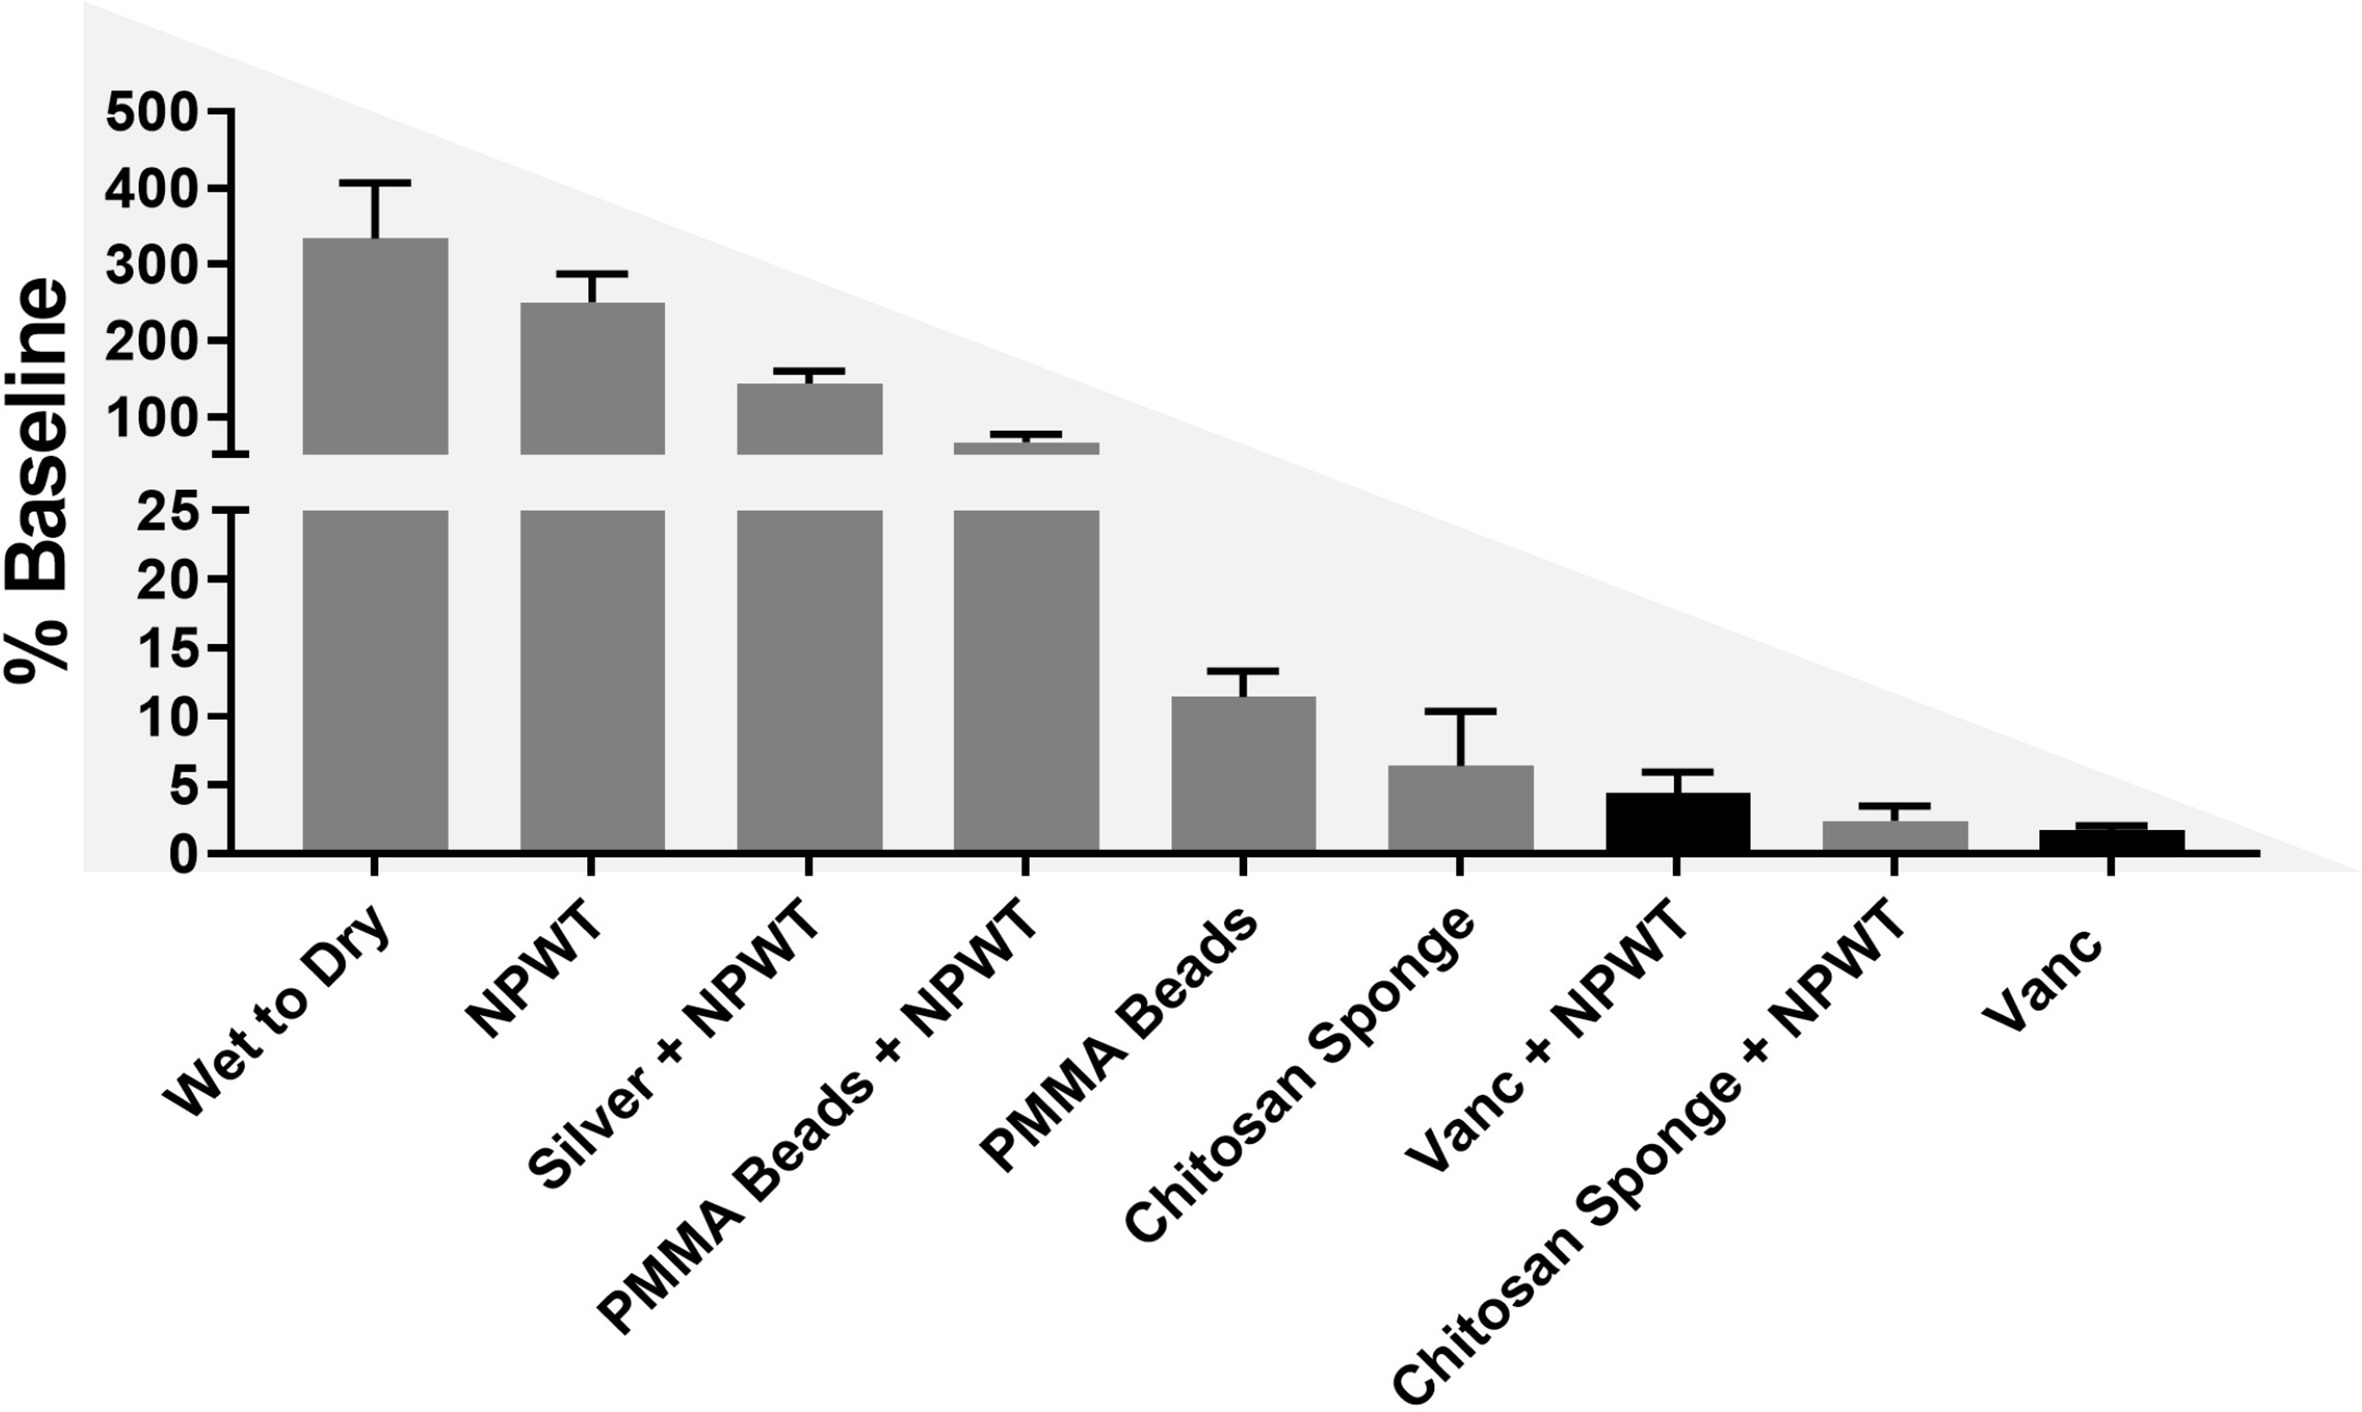 Fig. 3 
          Representative effectiveness of local wound therapies. The same large animal model was used to identify the effectivity of each of these therapies after two days of use. The dark grey colour represents previously published results.27,28,31,53,54 The black bars are from the current study. Wet to Dry, a standard dressing changed twice daily; NPWT, continuous negative pressure application; Silver + NPWT, a silver dressing placed directly on wound with NPWT application; polymethylmethacrylate (PMMA) Beads + NPWT, vancomycin-loaded PMMA beads placed directly on wound with NPWT application; PMMA beads, vancomycin-loaded PMMA beads placed directly on wound with semipermeable membrane application; Chitosan Sponge, vancomycin-loaded chitosan sponge placed directly on wound with a semipermeable membrane application; Chitosan Sponge + NPWT, vancomycin-loaded chitosan sponge placed directly on wound with NPWT application. Vanc + NPWT, vancomycin powder placed directly on wound with NPWT application; Vanc, vancomycin powder placed directly on wound.
        